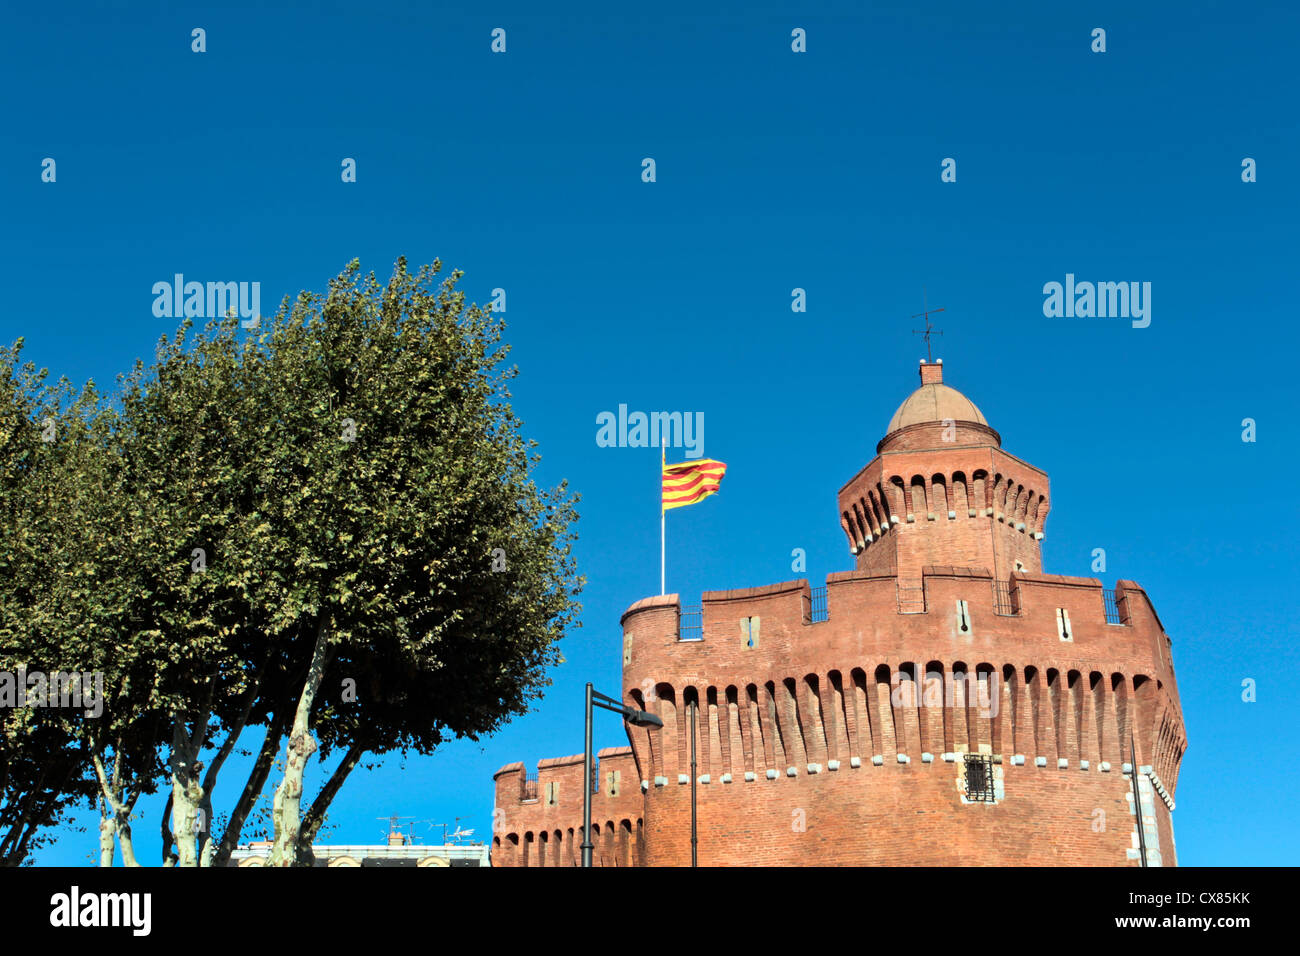 The castle (Castilet) of Perpignan flying the Catalan Flag, Languedoc Rousillon, South West France Stock Photo